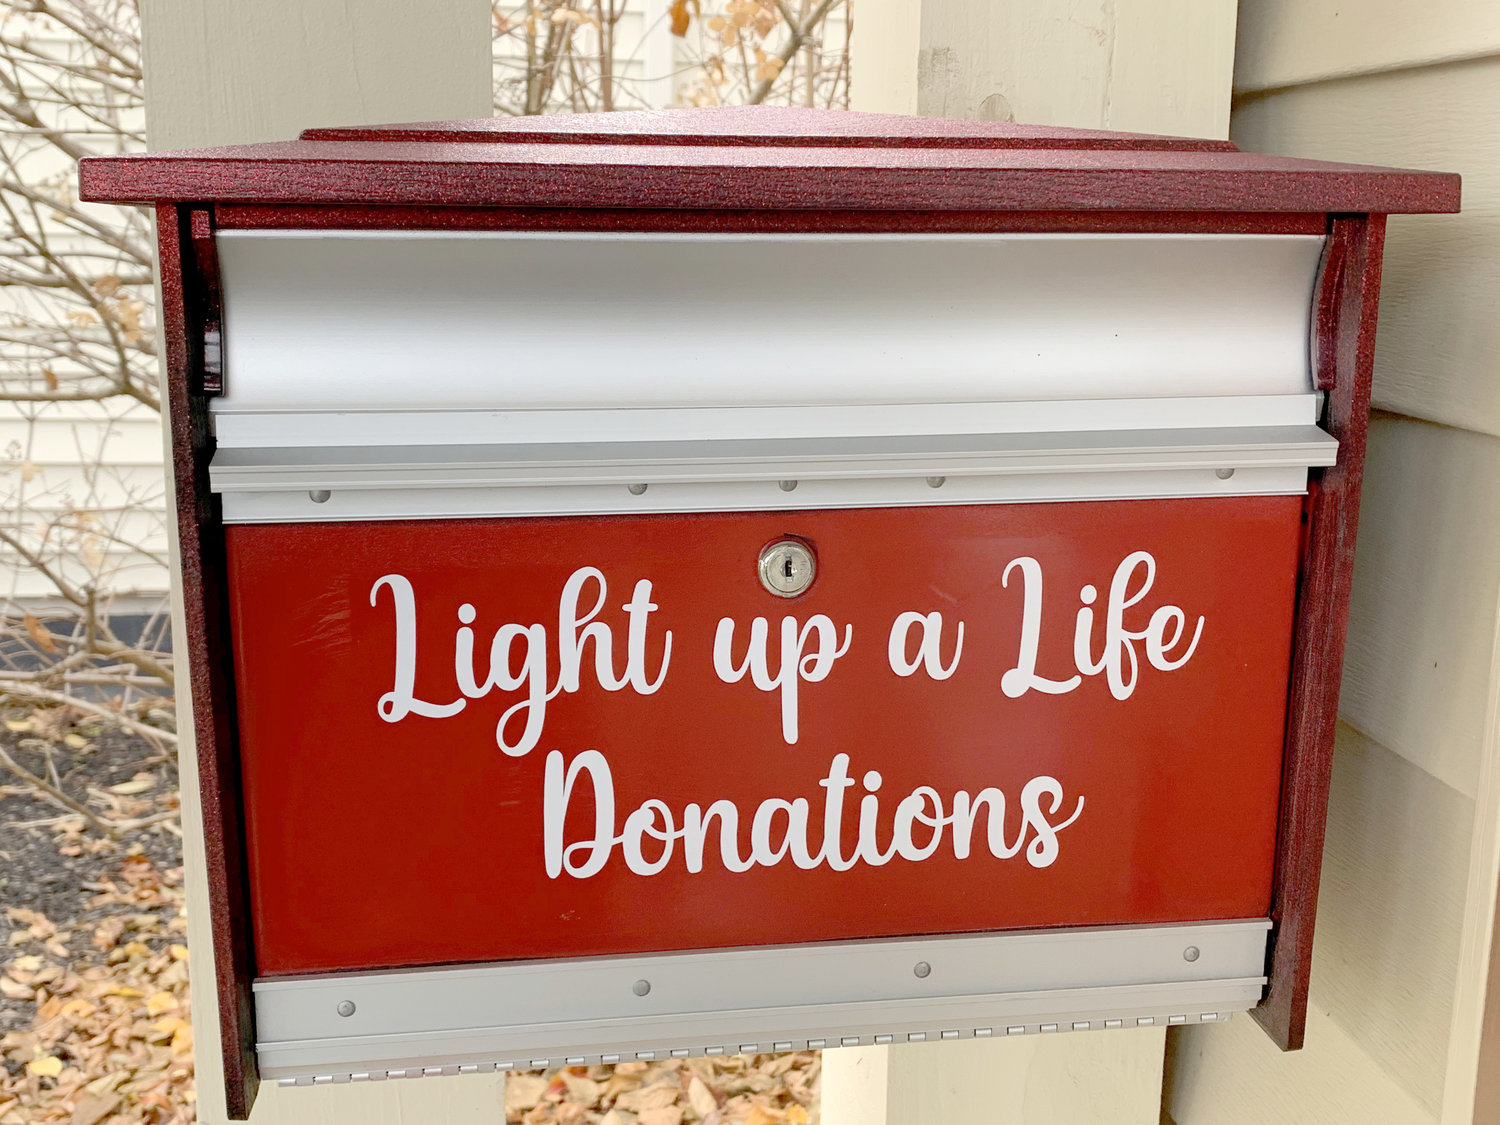 A donation box is set up to receive gifts to Hospice and Palliative Care’s end-of-the-year appeal and Light Up A Life Campaign, which celebrates the lives of those who have been loved and lost and also recognizes Hospice, its programs, services, staff and volunteers.(Photo submitted)